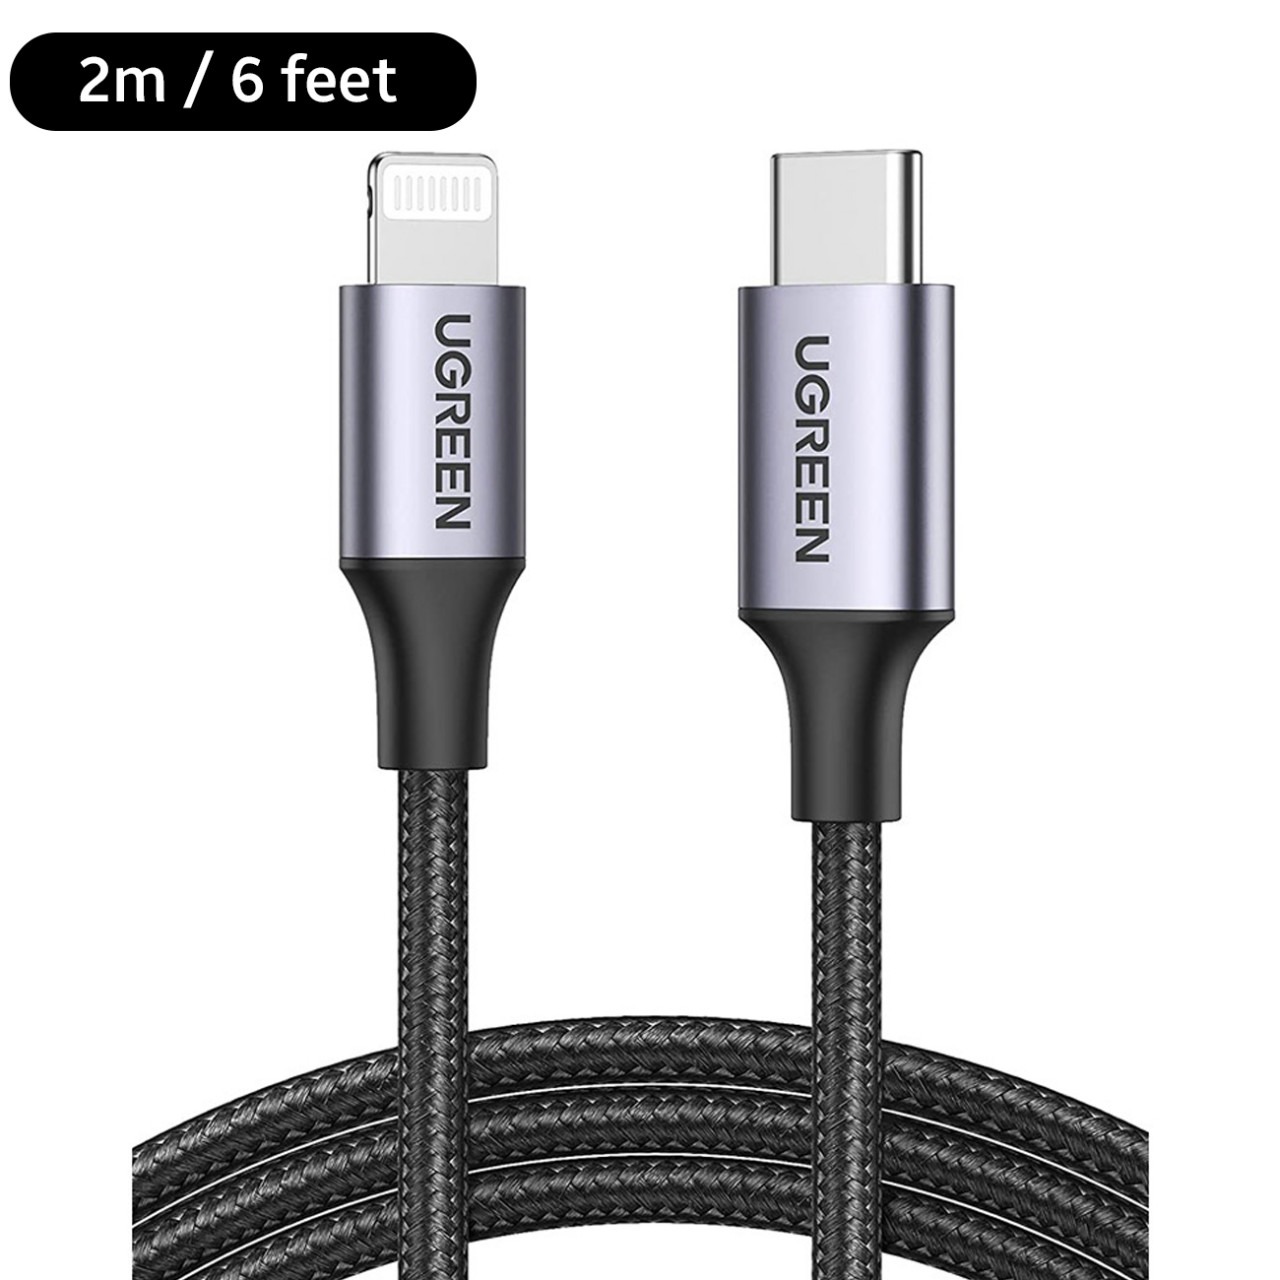 ugreen-usb-c-to-lightning-cable-2-m-6-feet__11019_zoom